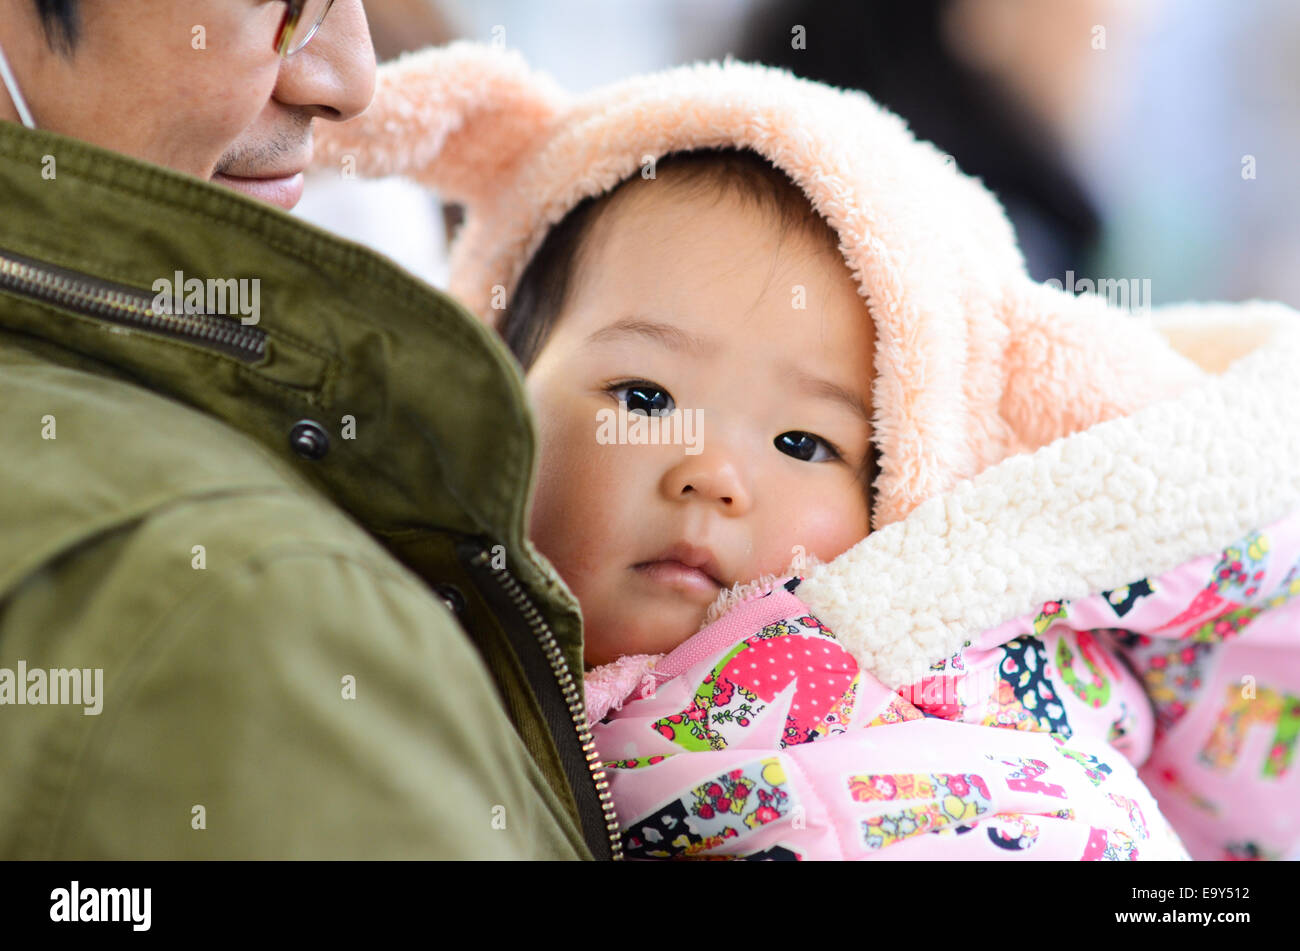 A Japanese baby. Stock Photo